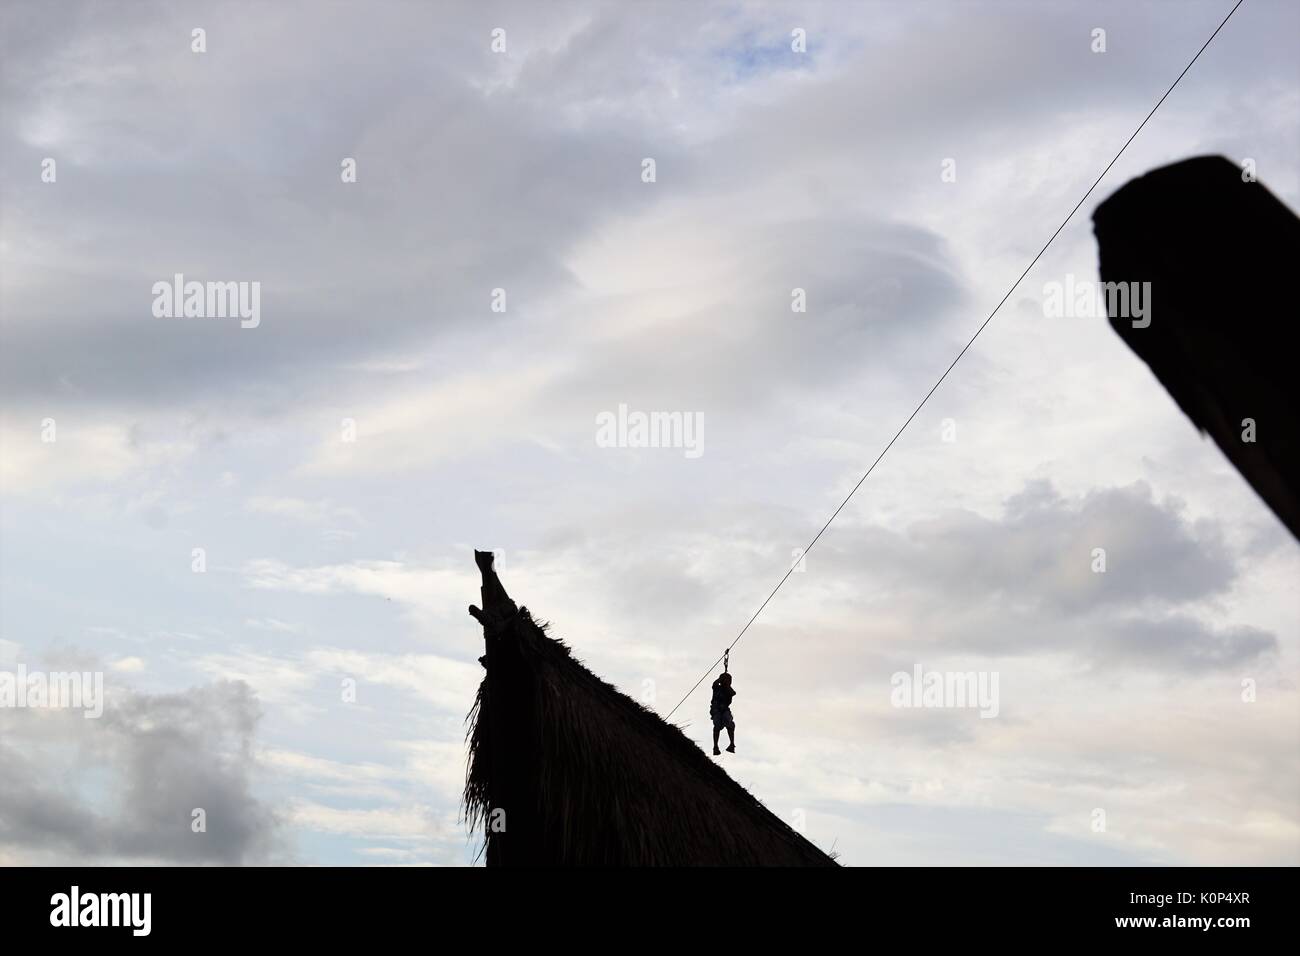 person zip lining between buildings against blue sky with clouds Stock Photo